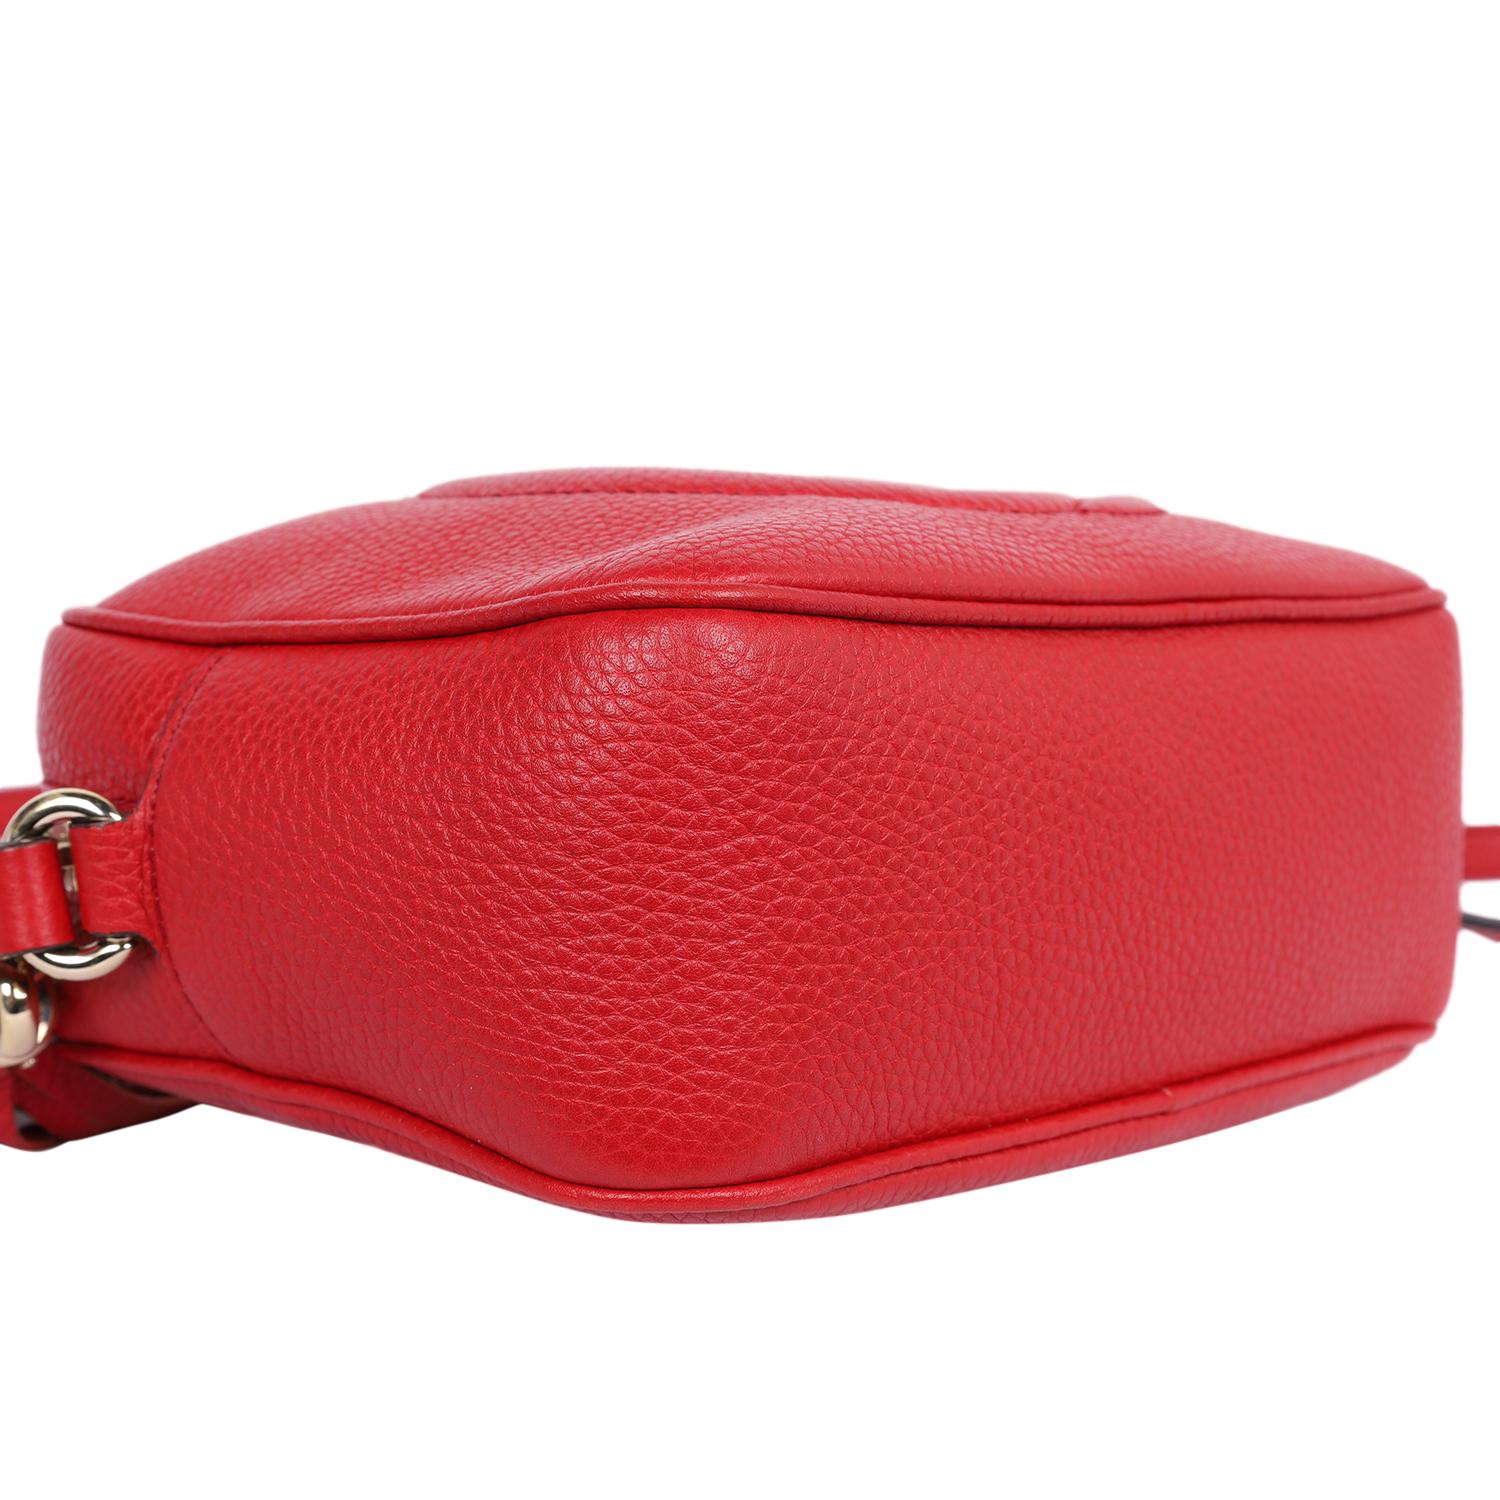 Gucci GG Red Soho Disco Leather Cross Body Bag For Sale 9